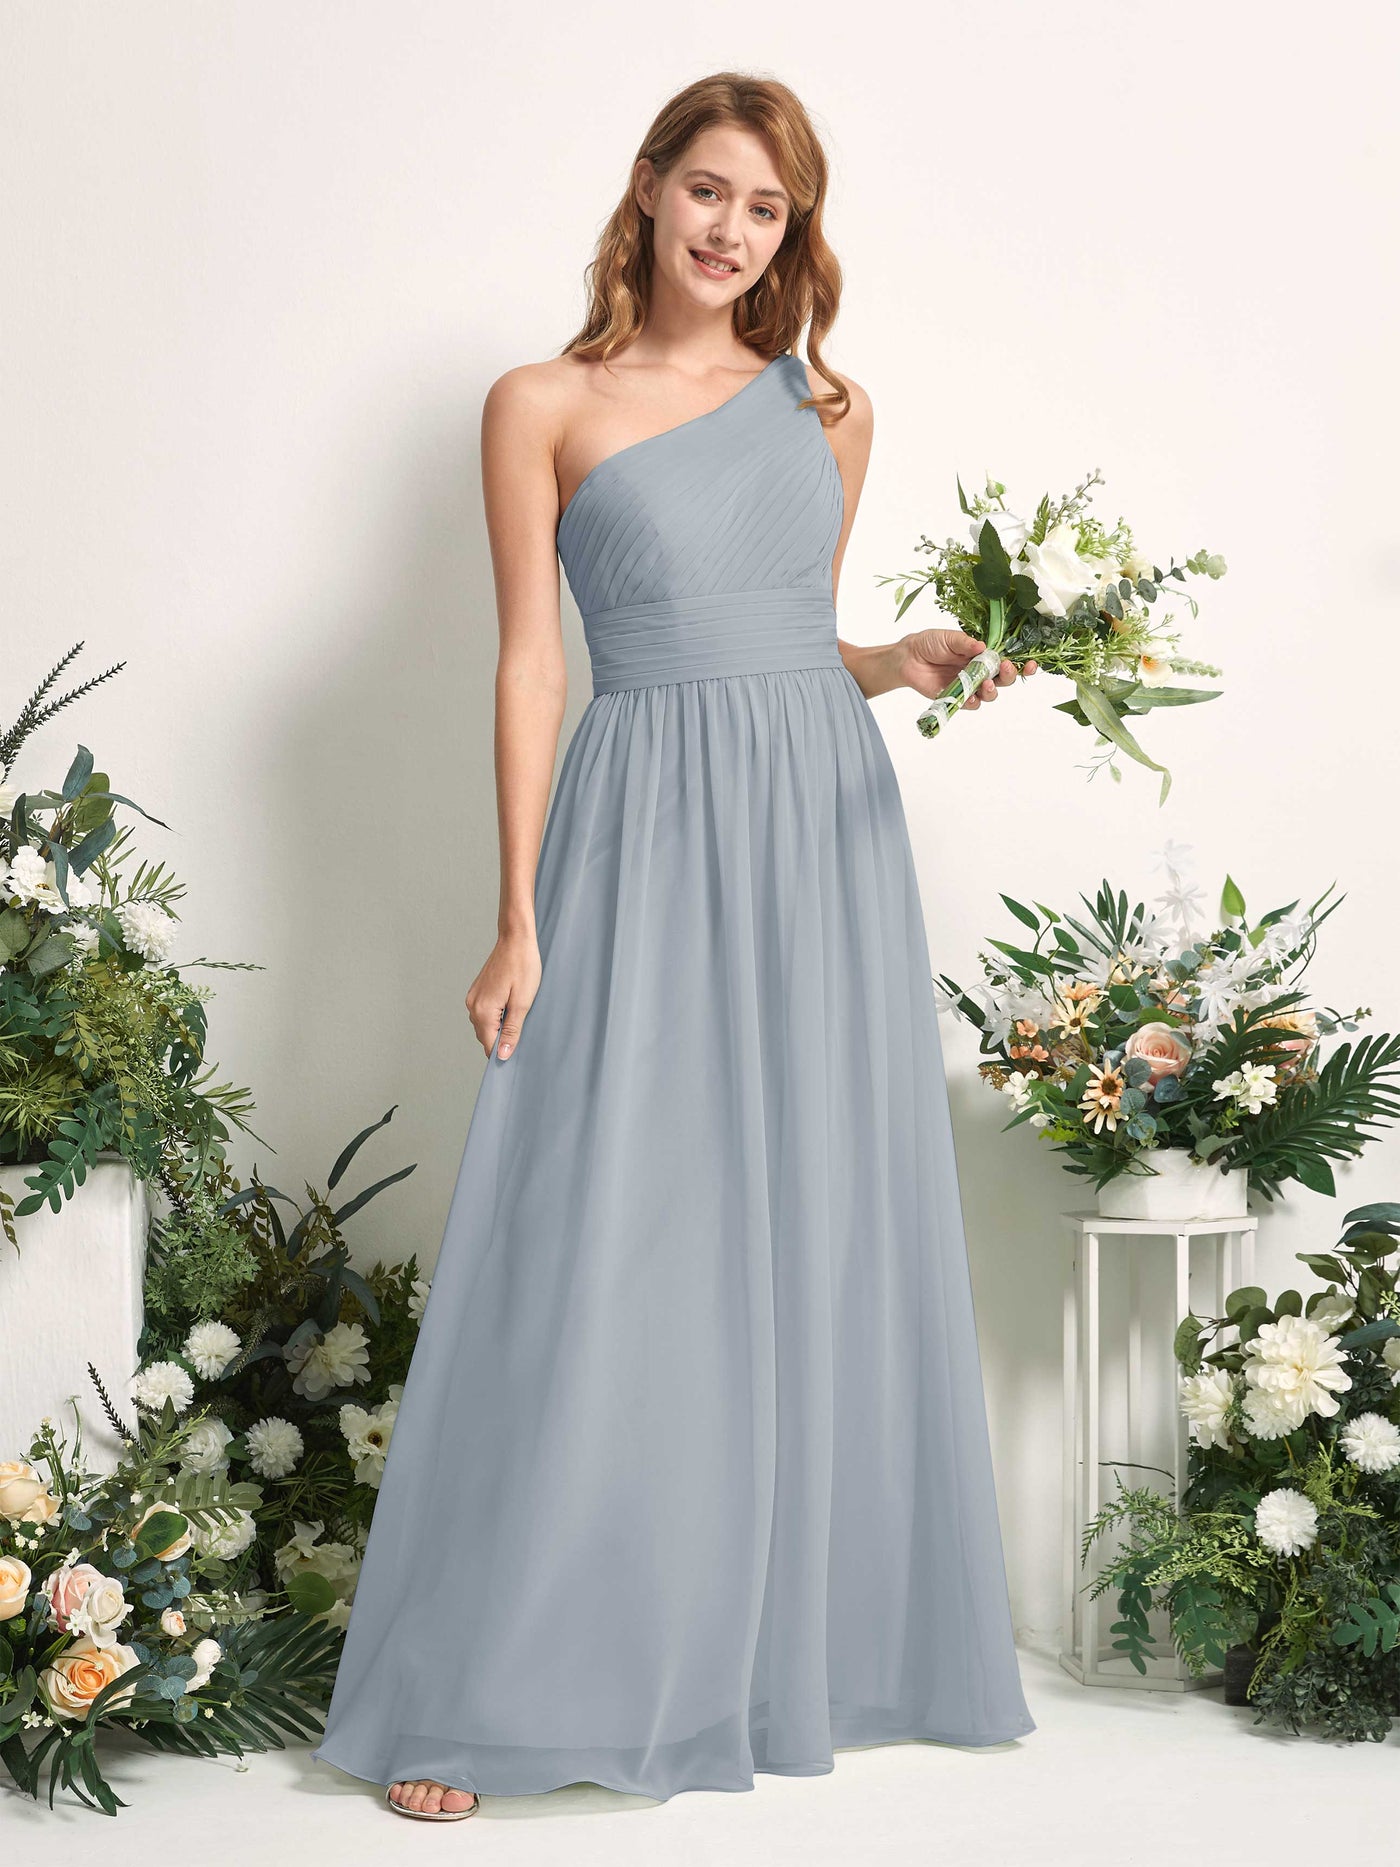 Bridesmaid Dress A-line Chiffon One Shoulder Full Length Sleeveless Wedding Party Dress - Dusty Blue-Upgrade (81226704)#color_dusty-blue-upgrade